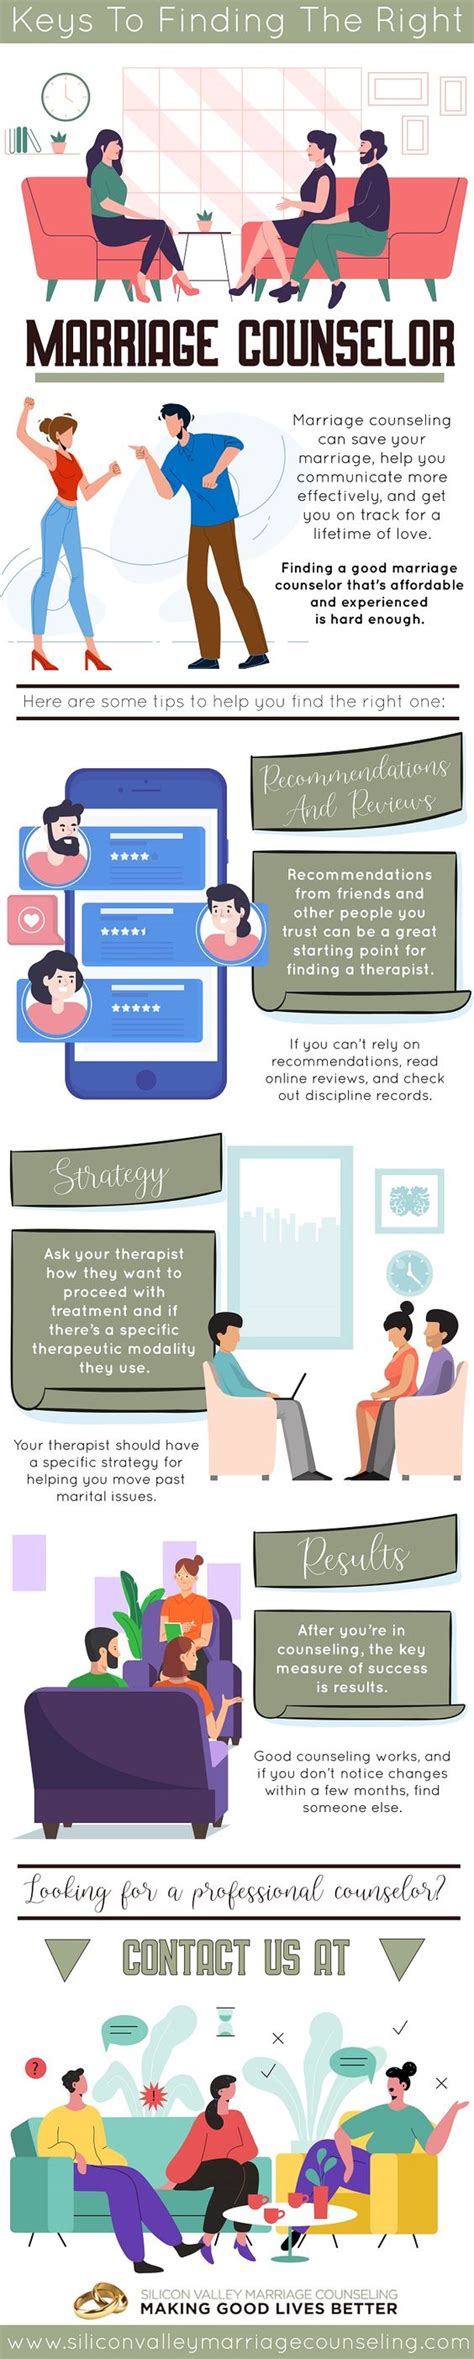 Keys To Finding The Right Marriage Counselor Infographic Silicon Valley Marriage Counseling